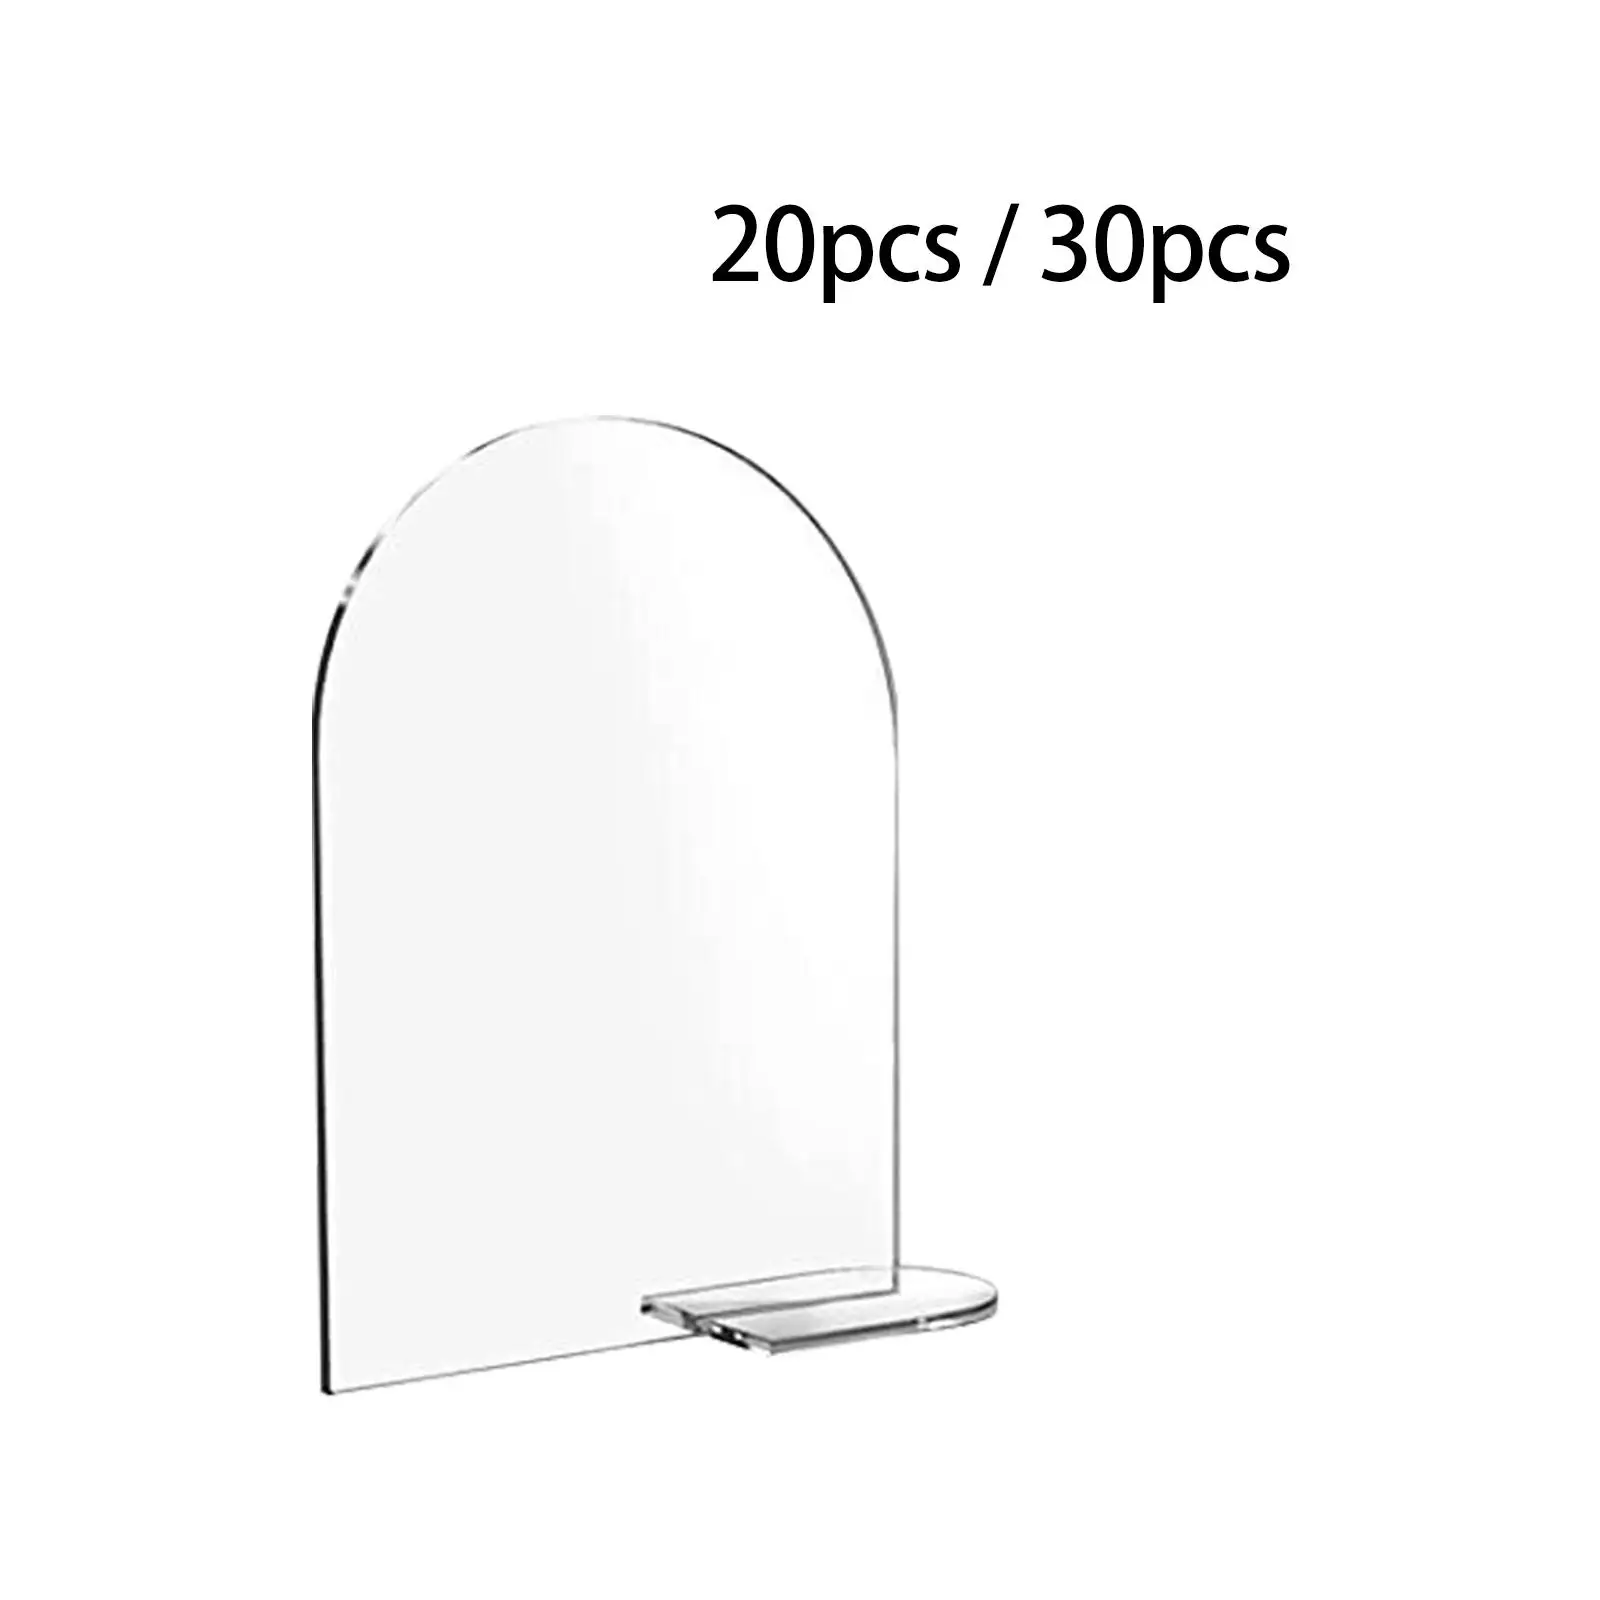 4x6 inch Blank Acrylic Signs Holder Stand Centerpieces List Sign DIY Place Cards for Wedding Reception Exhibition Events Banquet